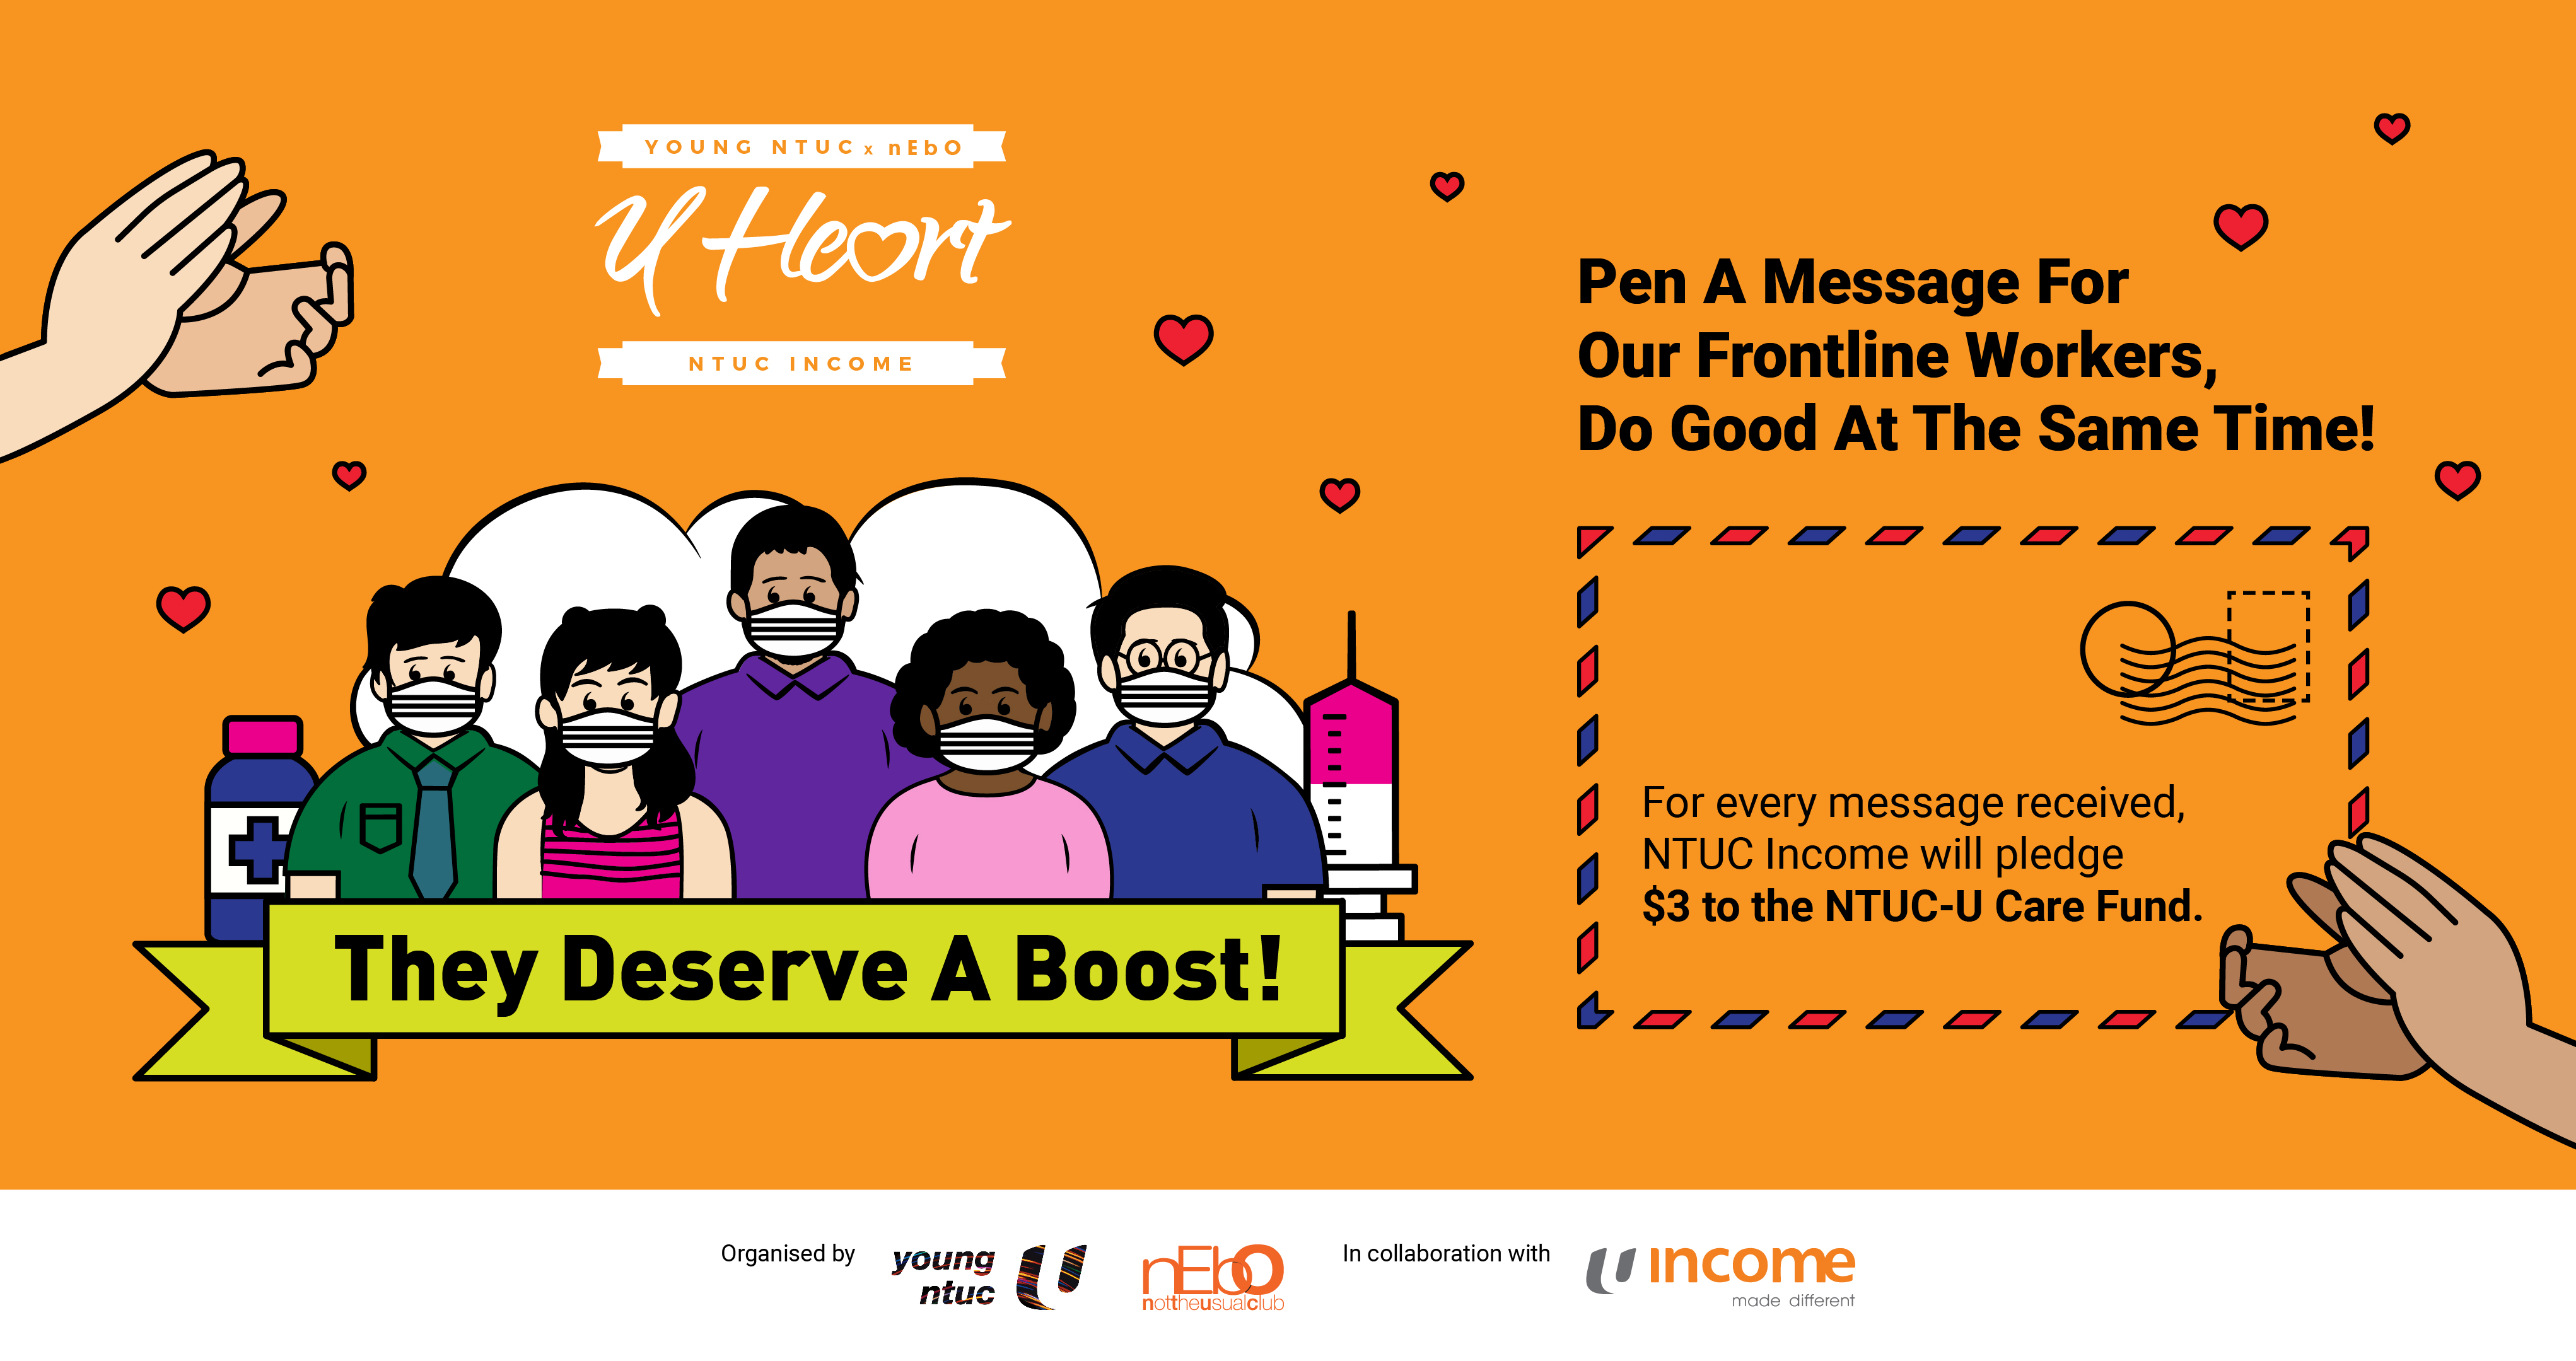 Income_NTUC60 Mass U Heart Activation (Giving U a Boost)_Updated 16 Nov 2021